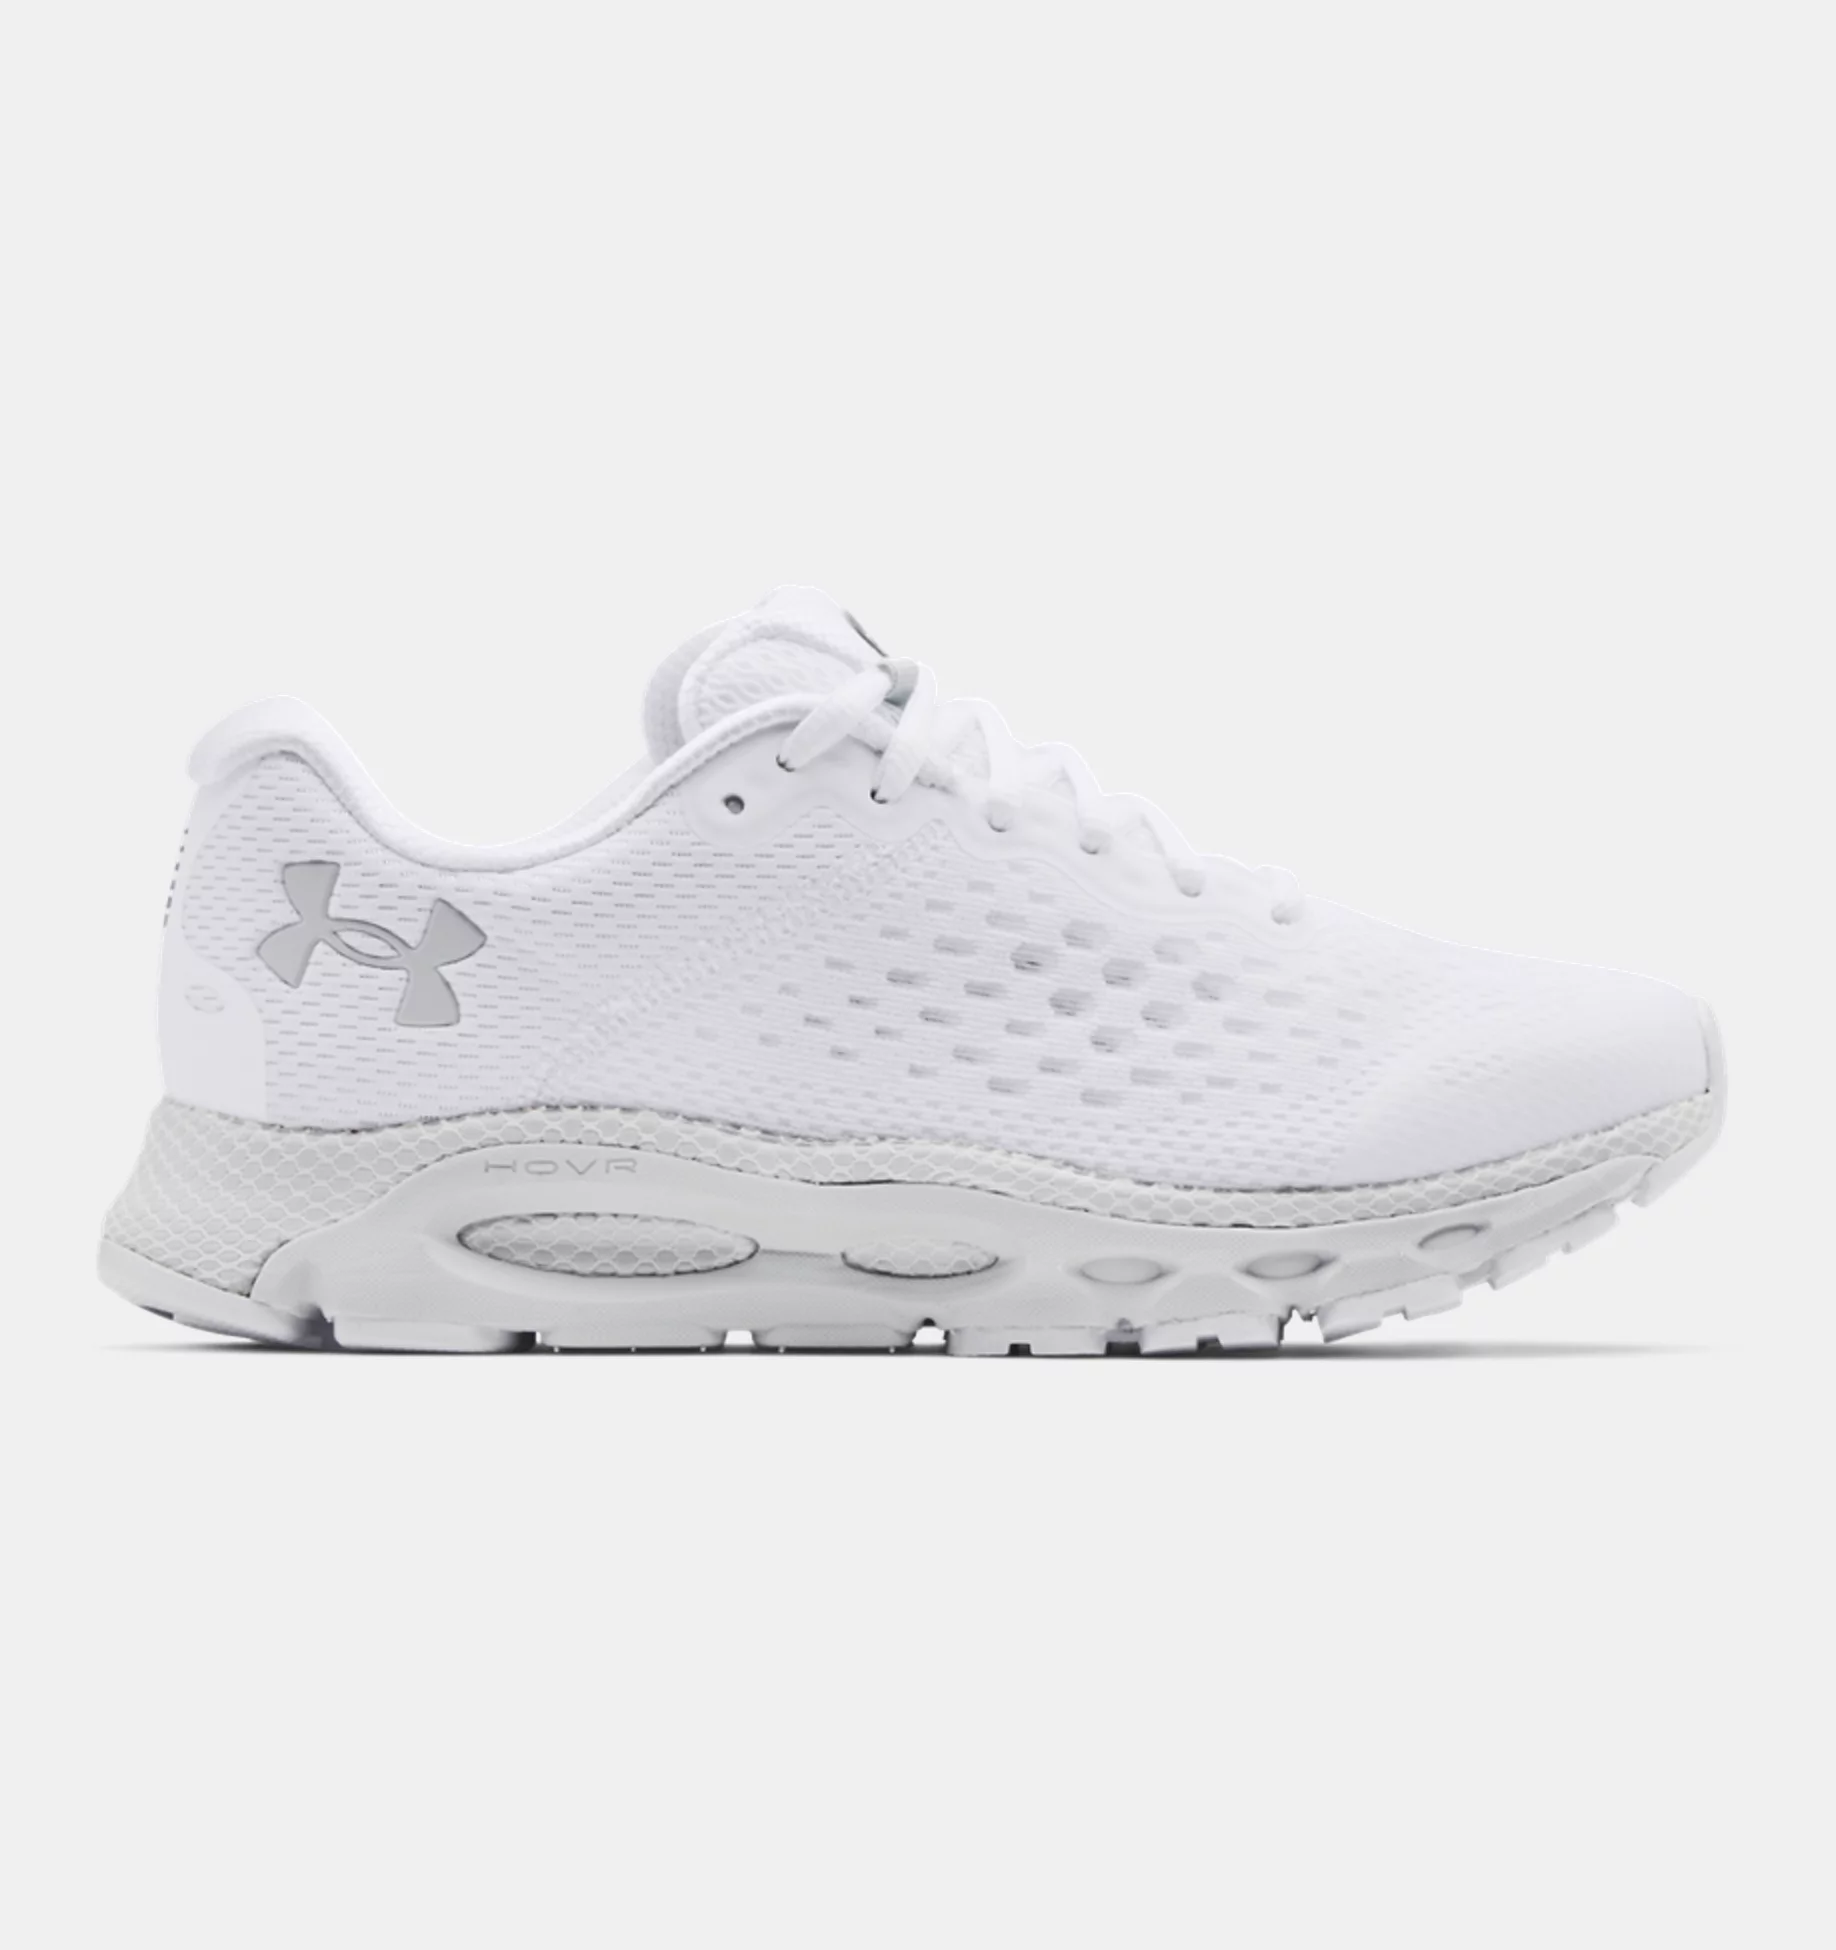 Under Armour Women's Hovr